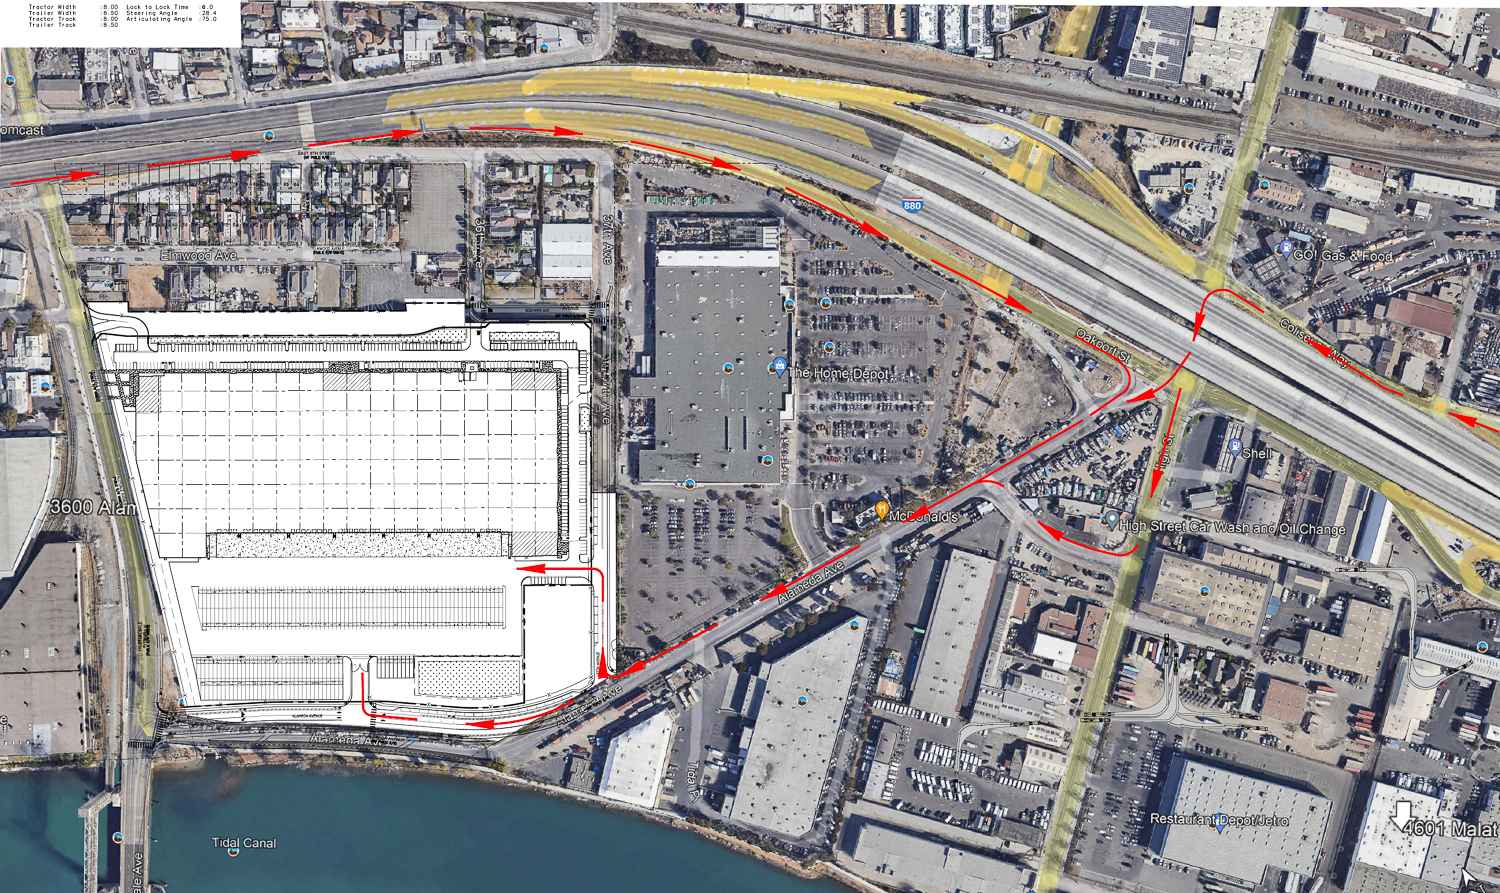 3600 Alameda Avenue site map with traffic flow illustrated with red arrows, rendering by HPA